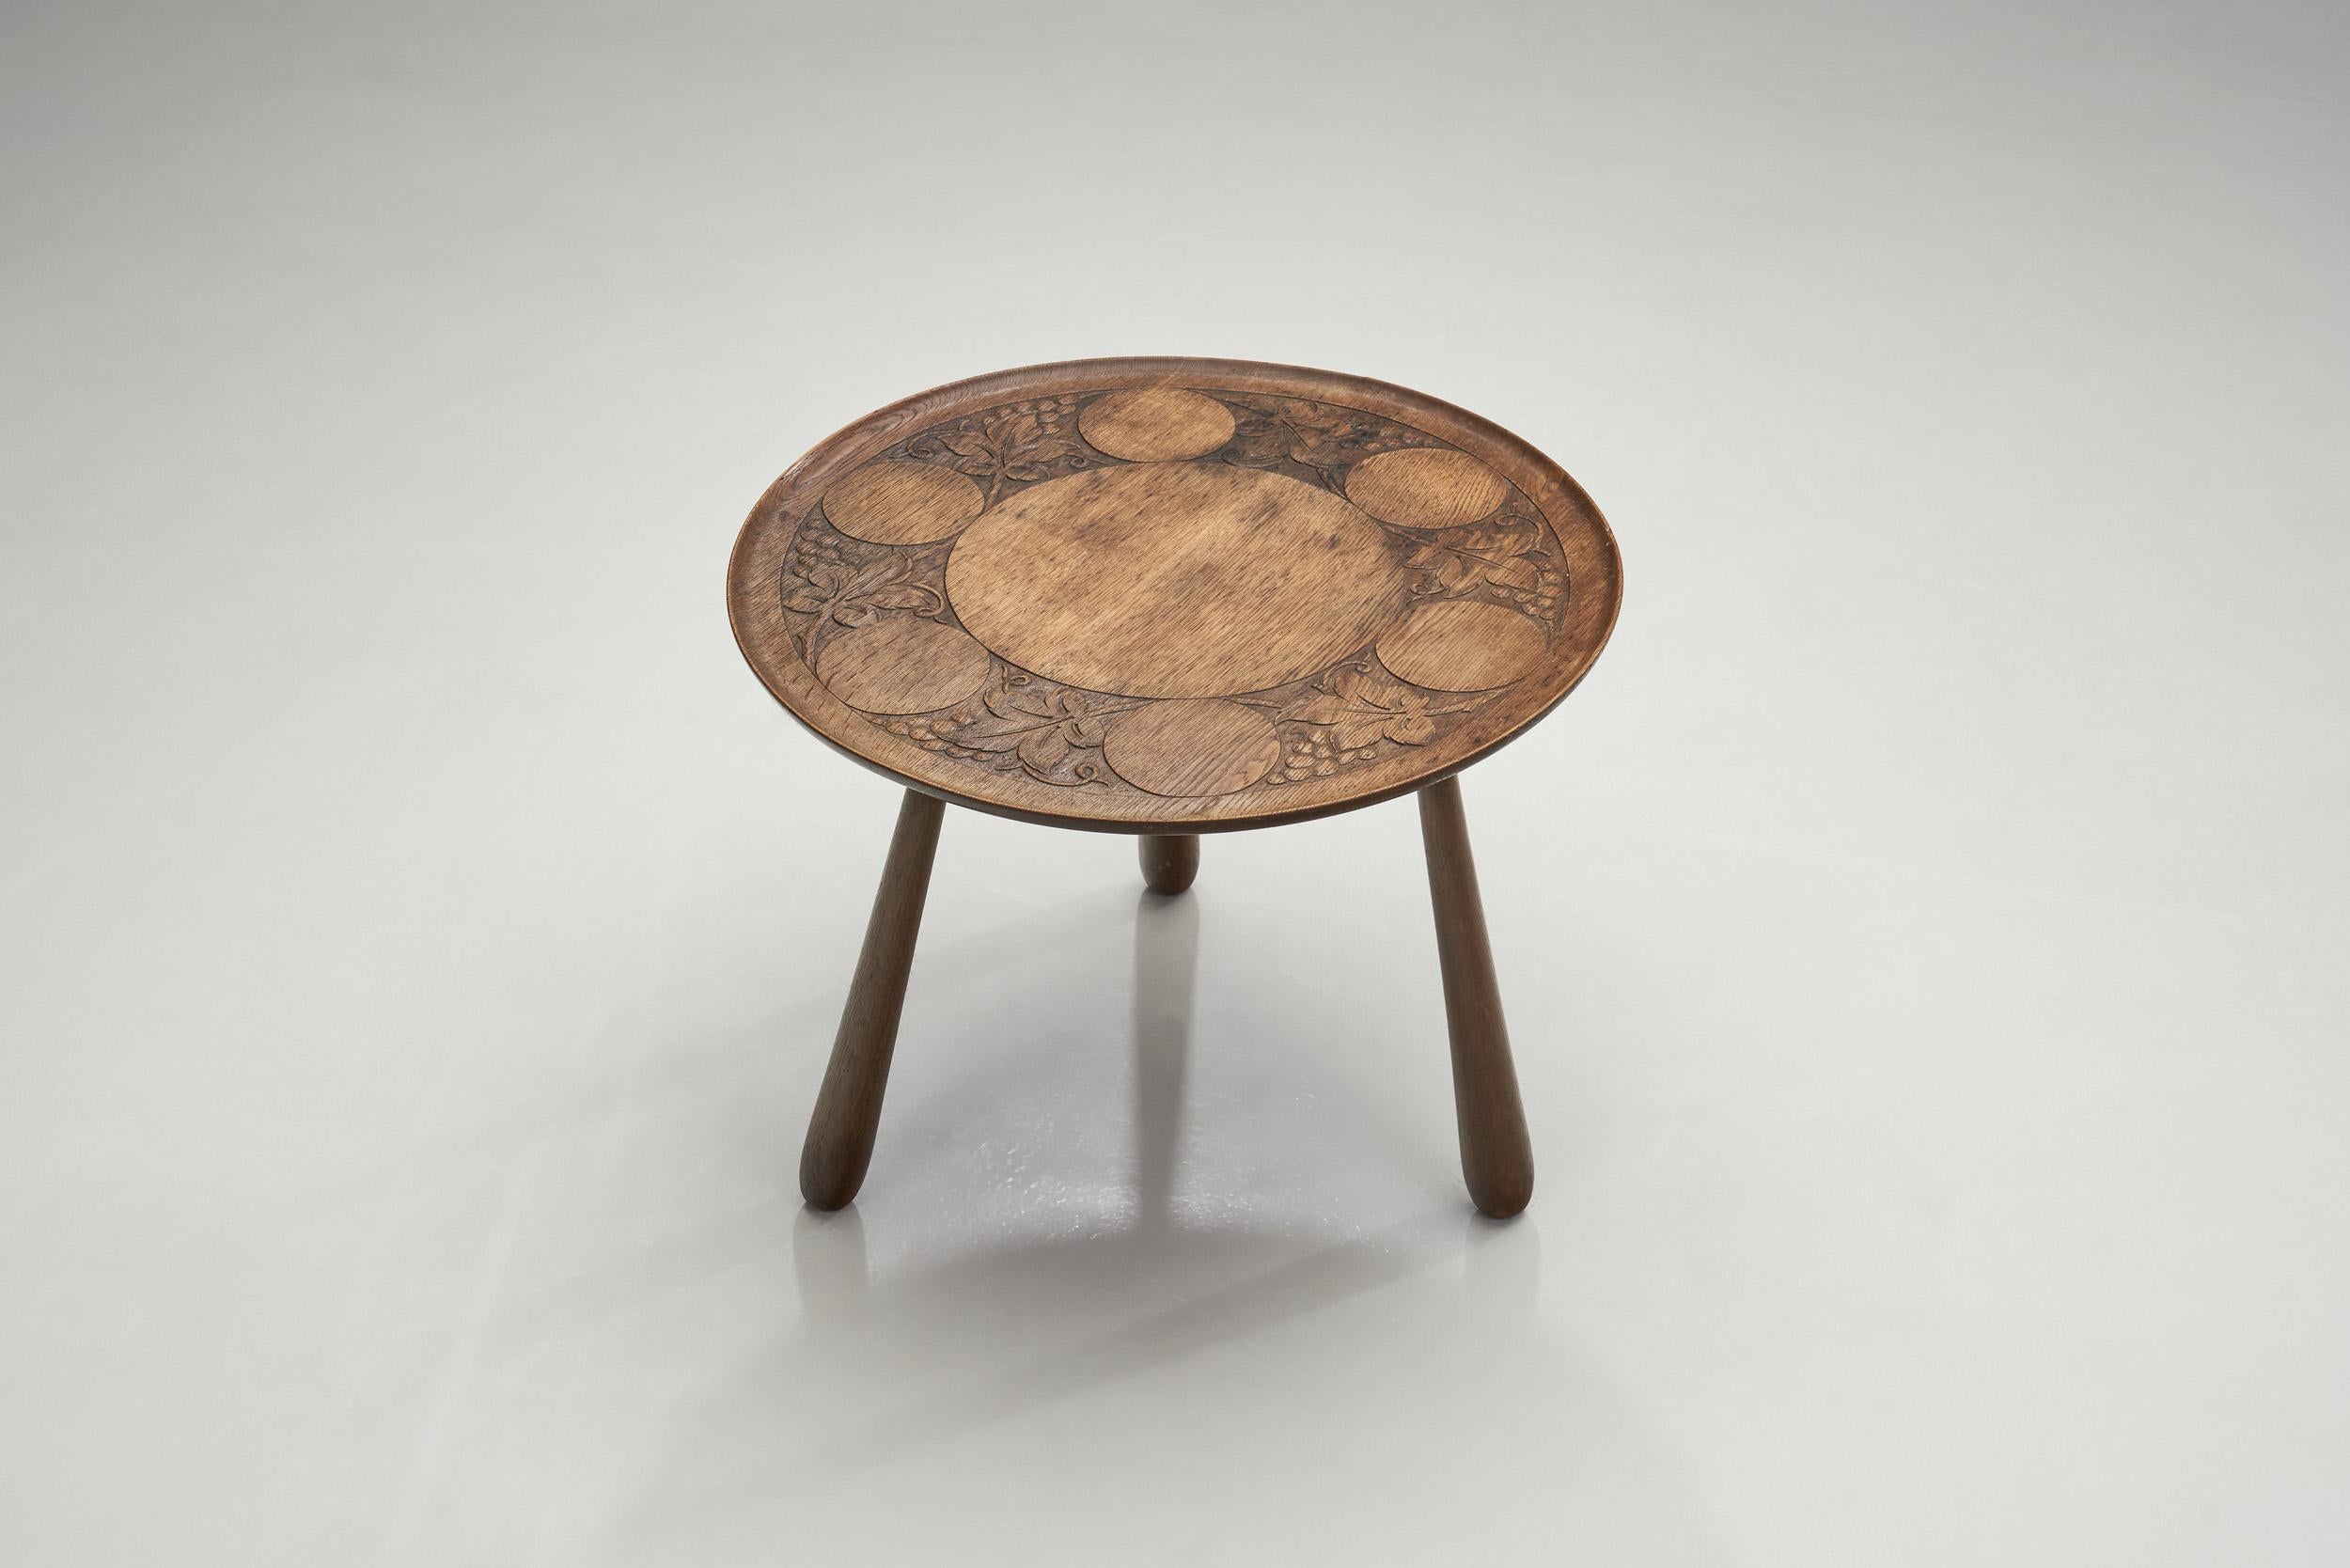 20th Century Carved Stained Oak Coffee Table on Tripod Legs, Europe, ca 1940s For Sale